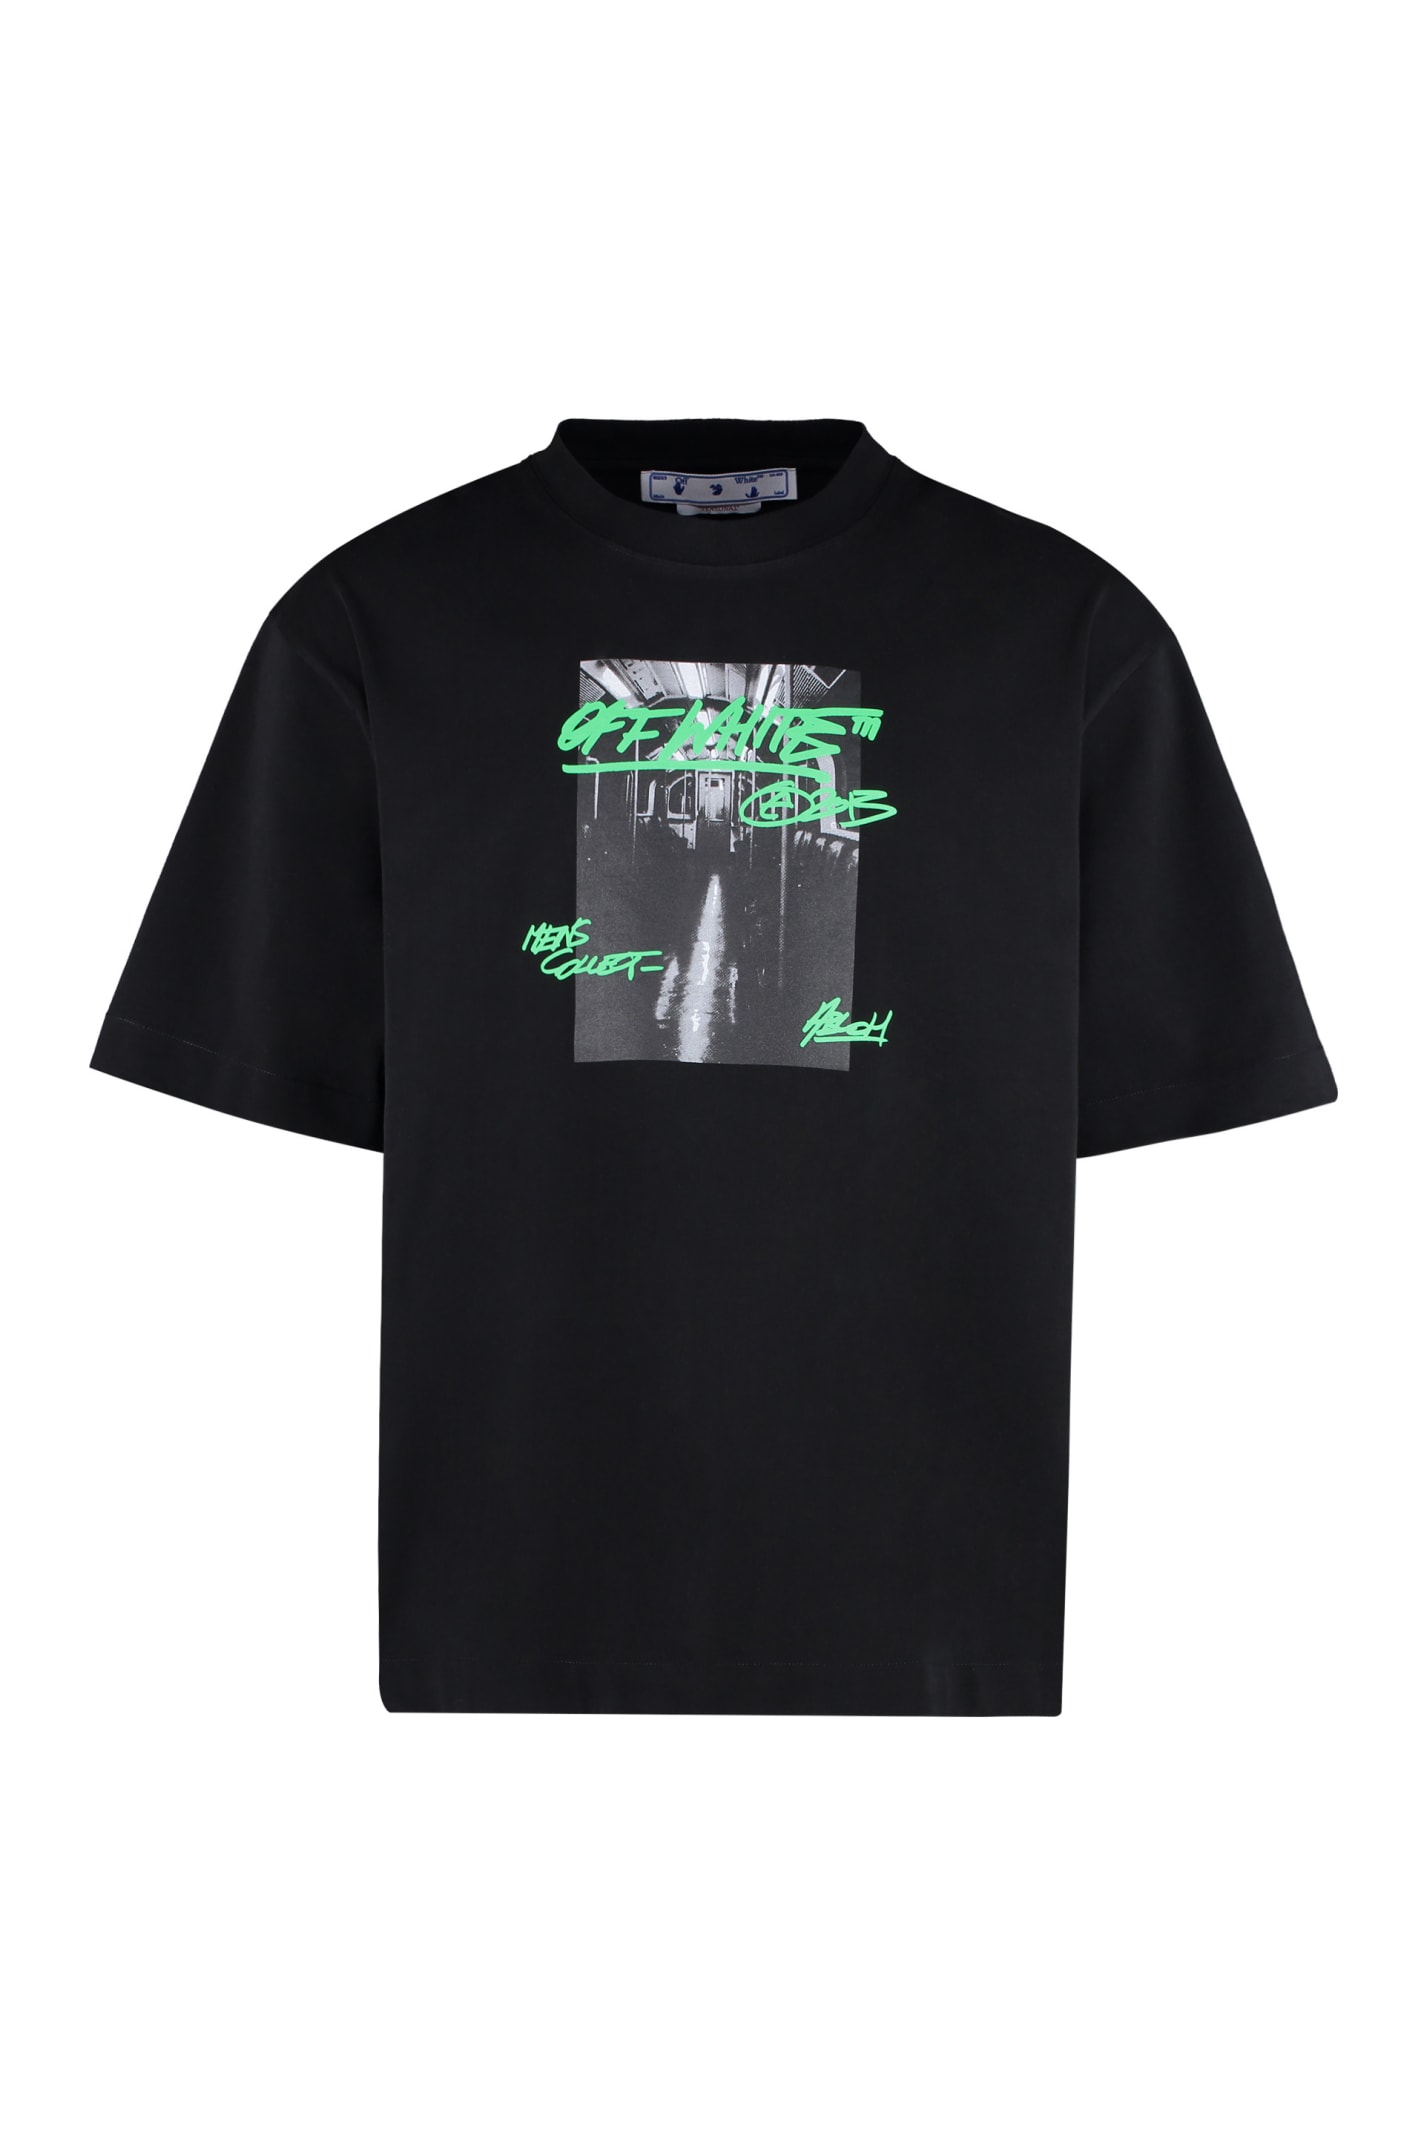 Off-White Printed Cotton T-shirt